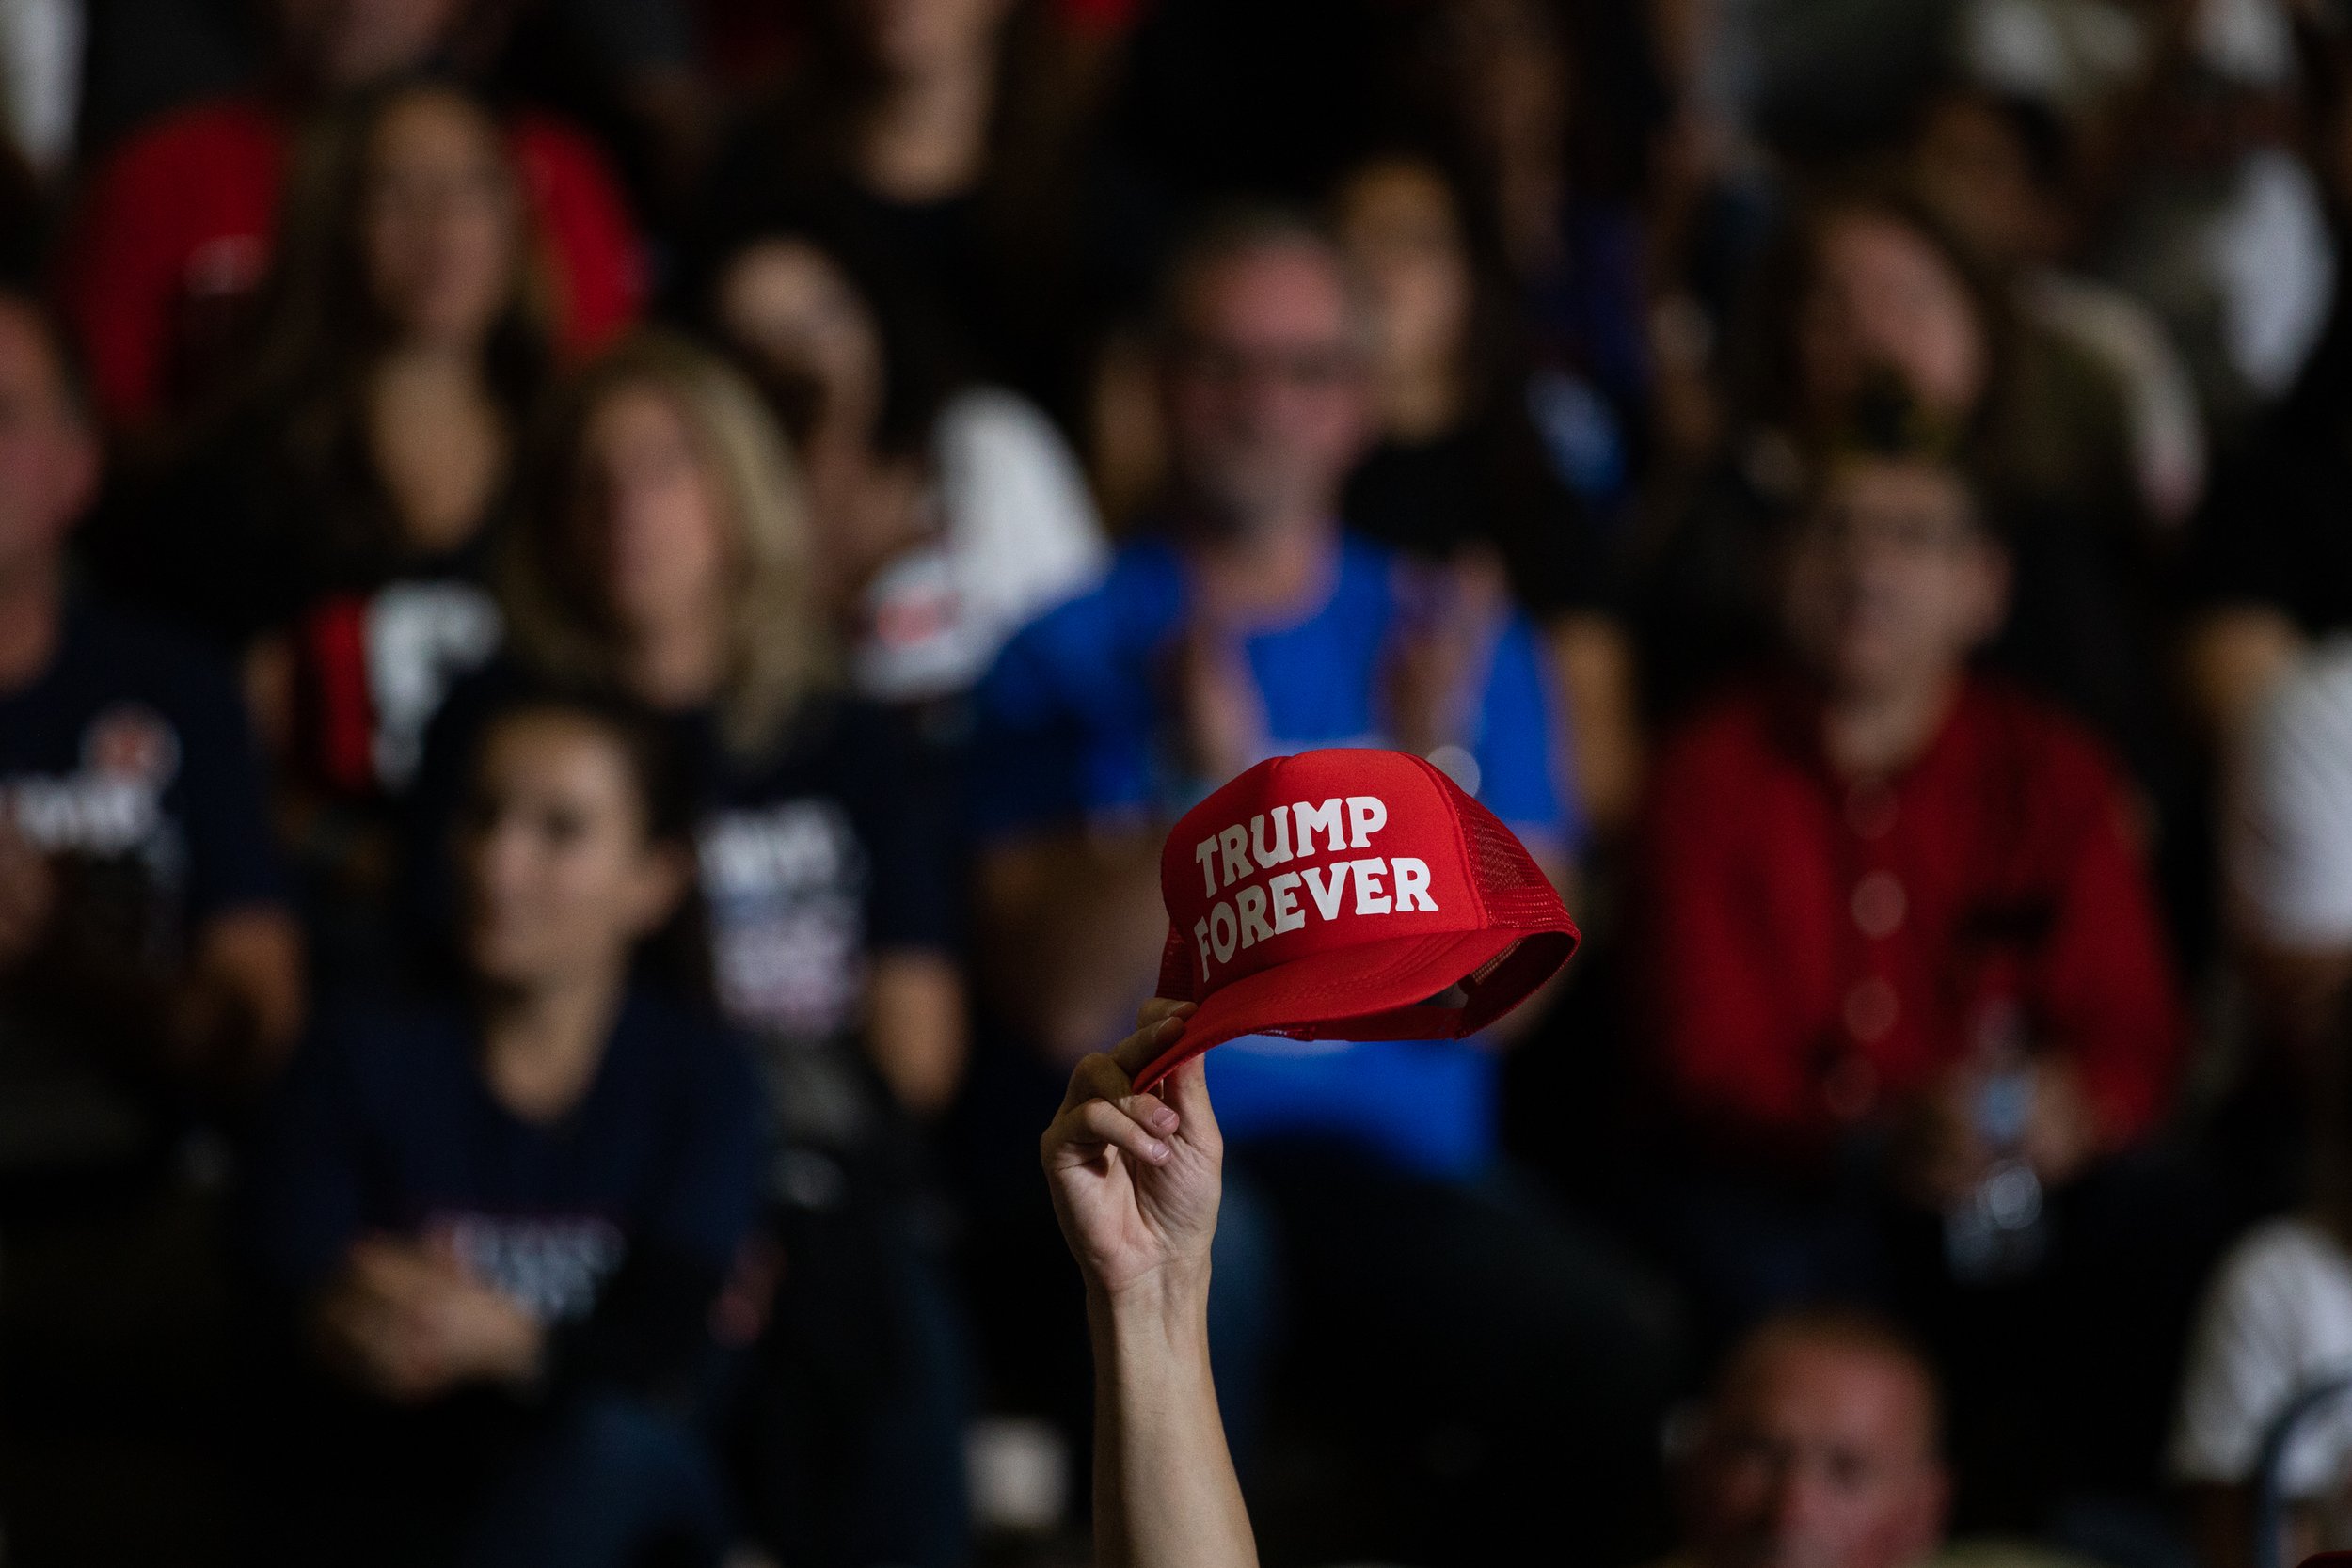  A supporters of Former President Donald Trump raises their hat in the air during a Save America rally on October 1, 2022 in Warren, Michigan. Trump has endorsed Republican gubernatorial candidate Tudor Dixon, Secretary of State candidate Kristina Ka